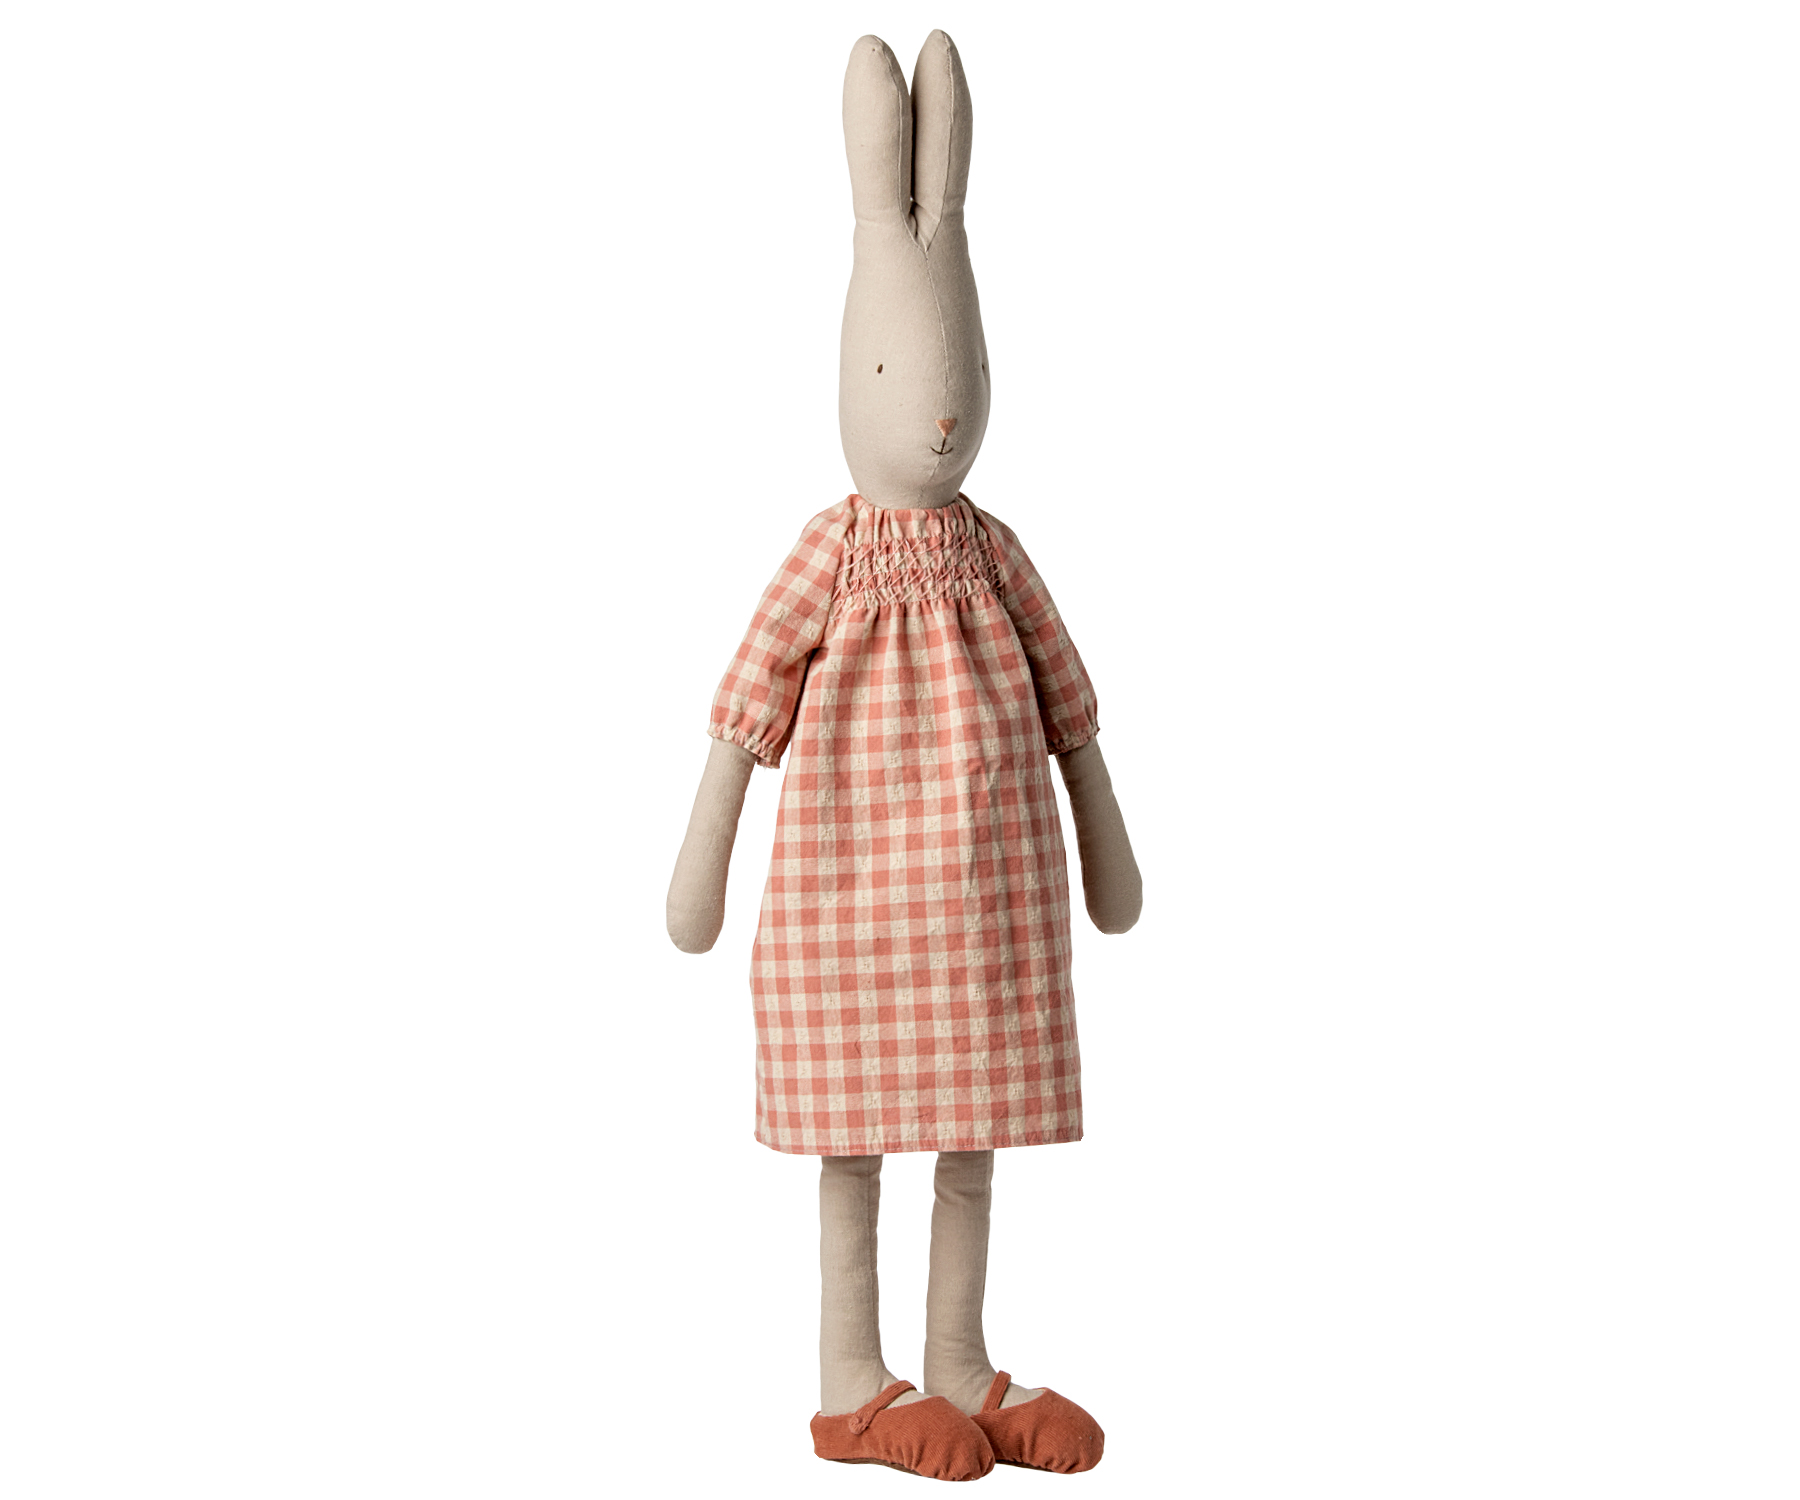 Bunny size 3, Dusty yellow - Overall